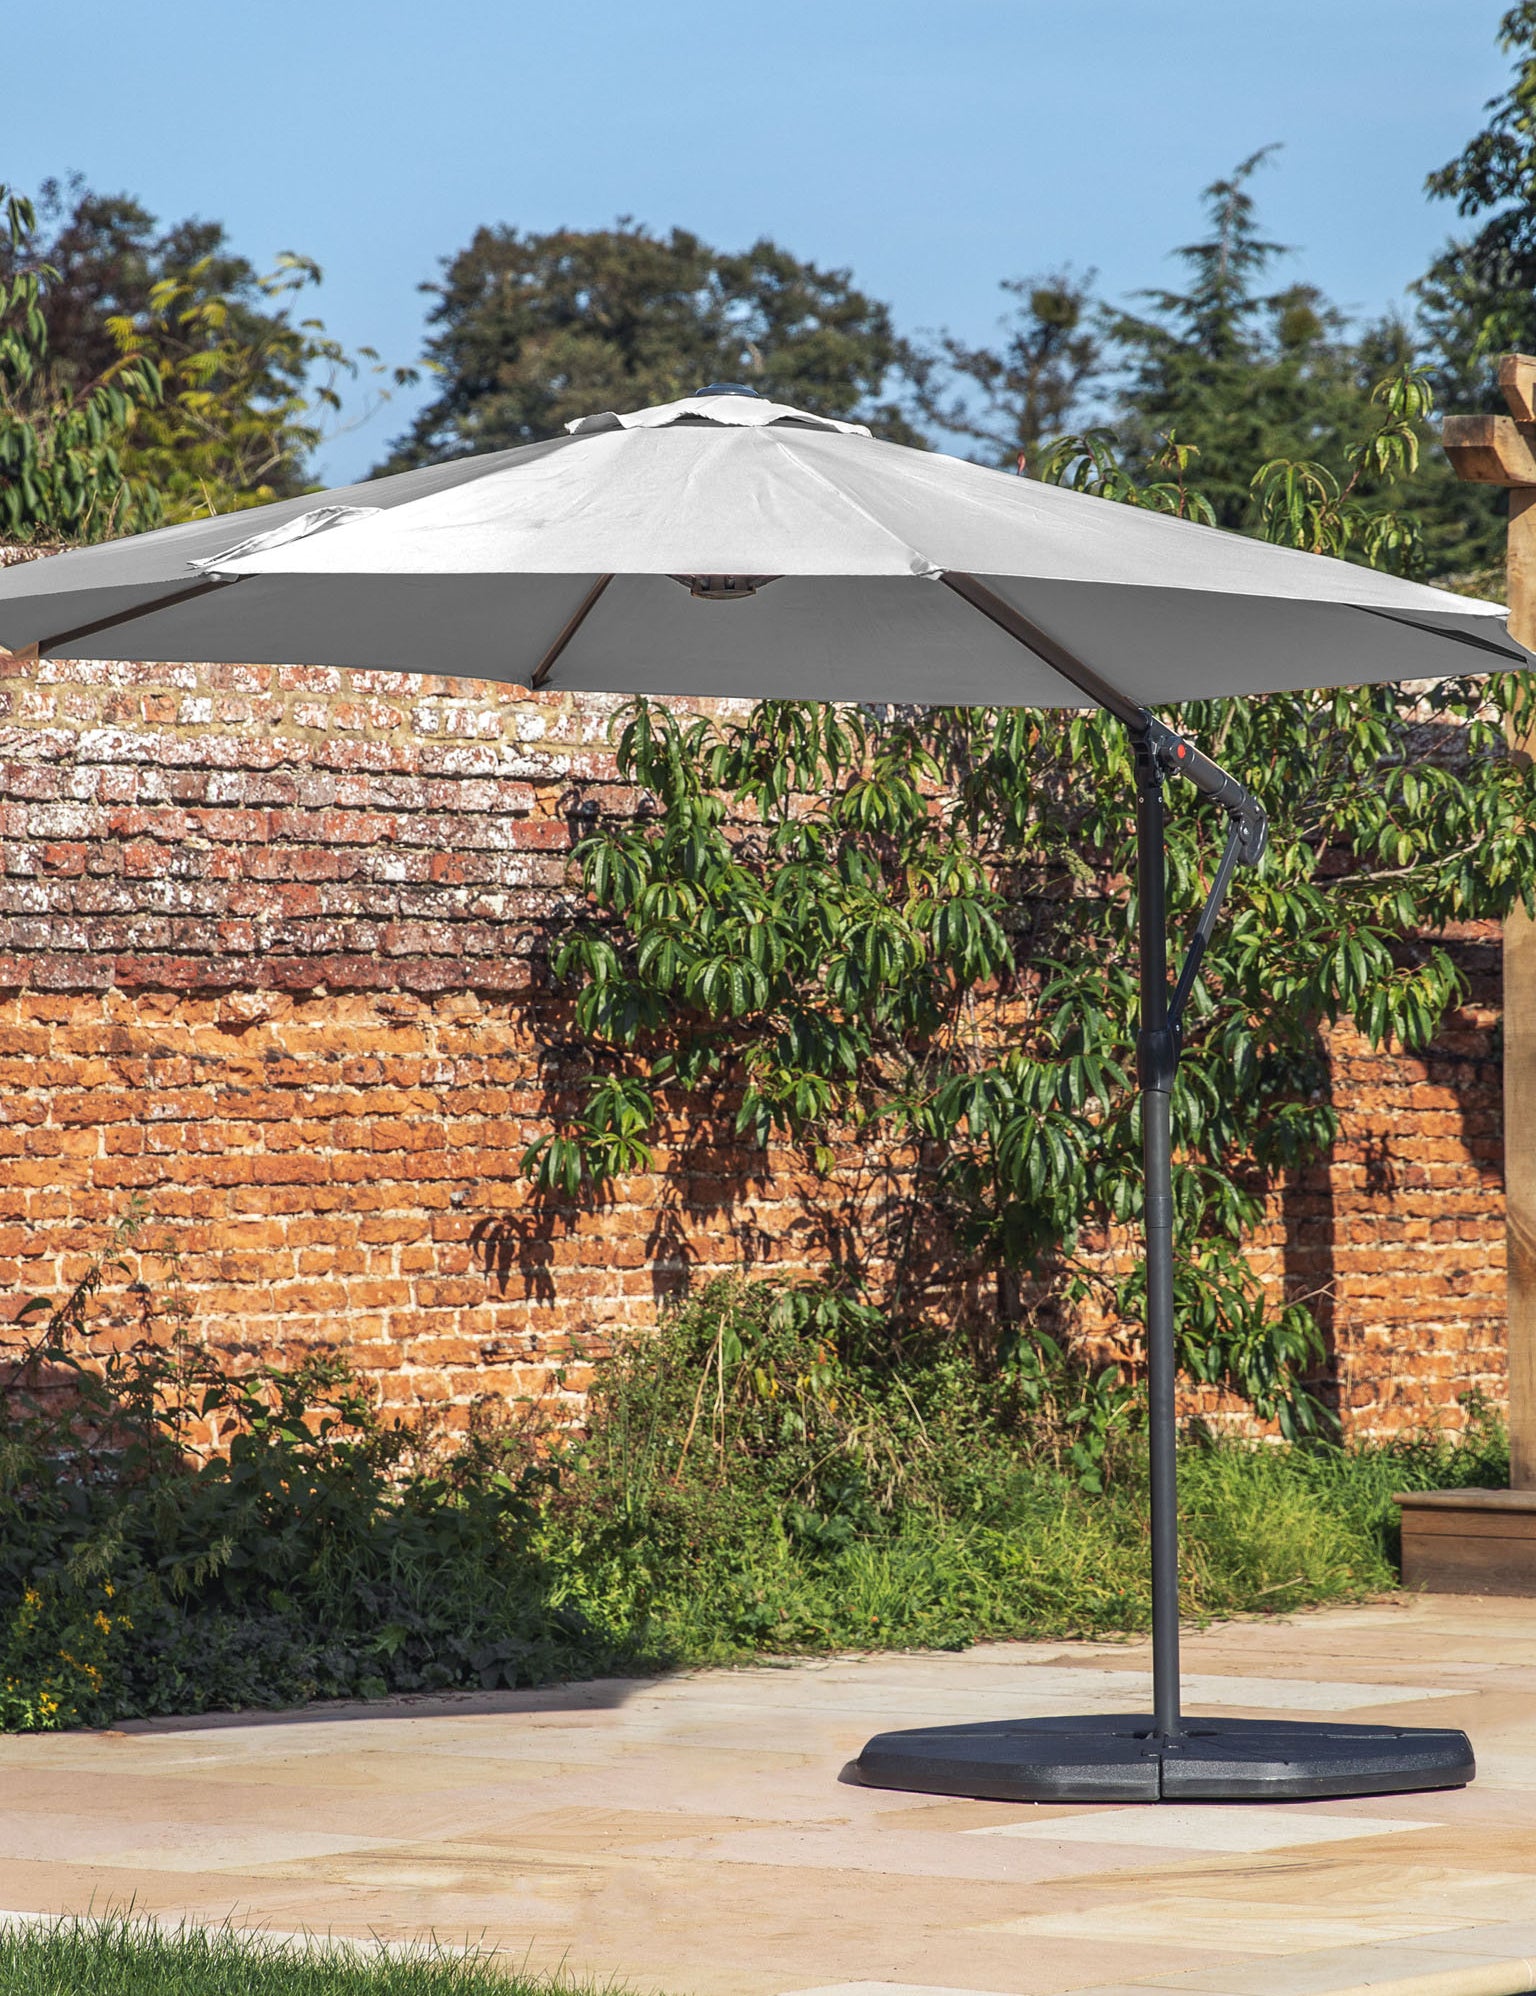 This 3m Cantilever Parasol offers a lovely large garden parasol with a crank handle, cantilever action and tilt mechanism for adjustment of the parasol. 